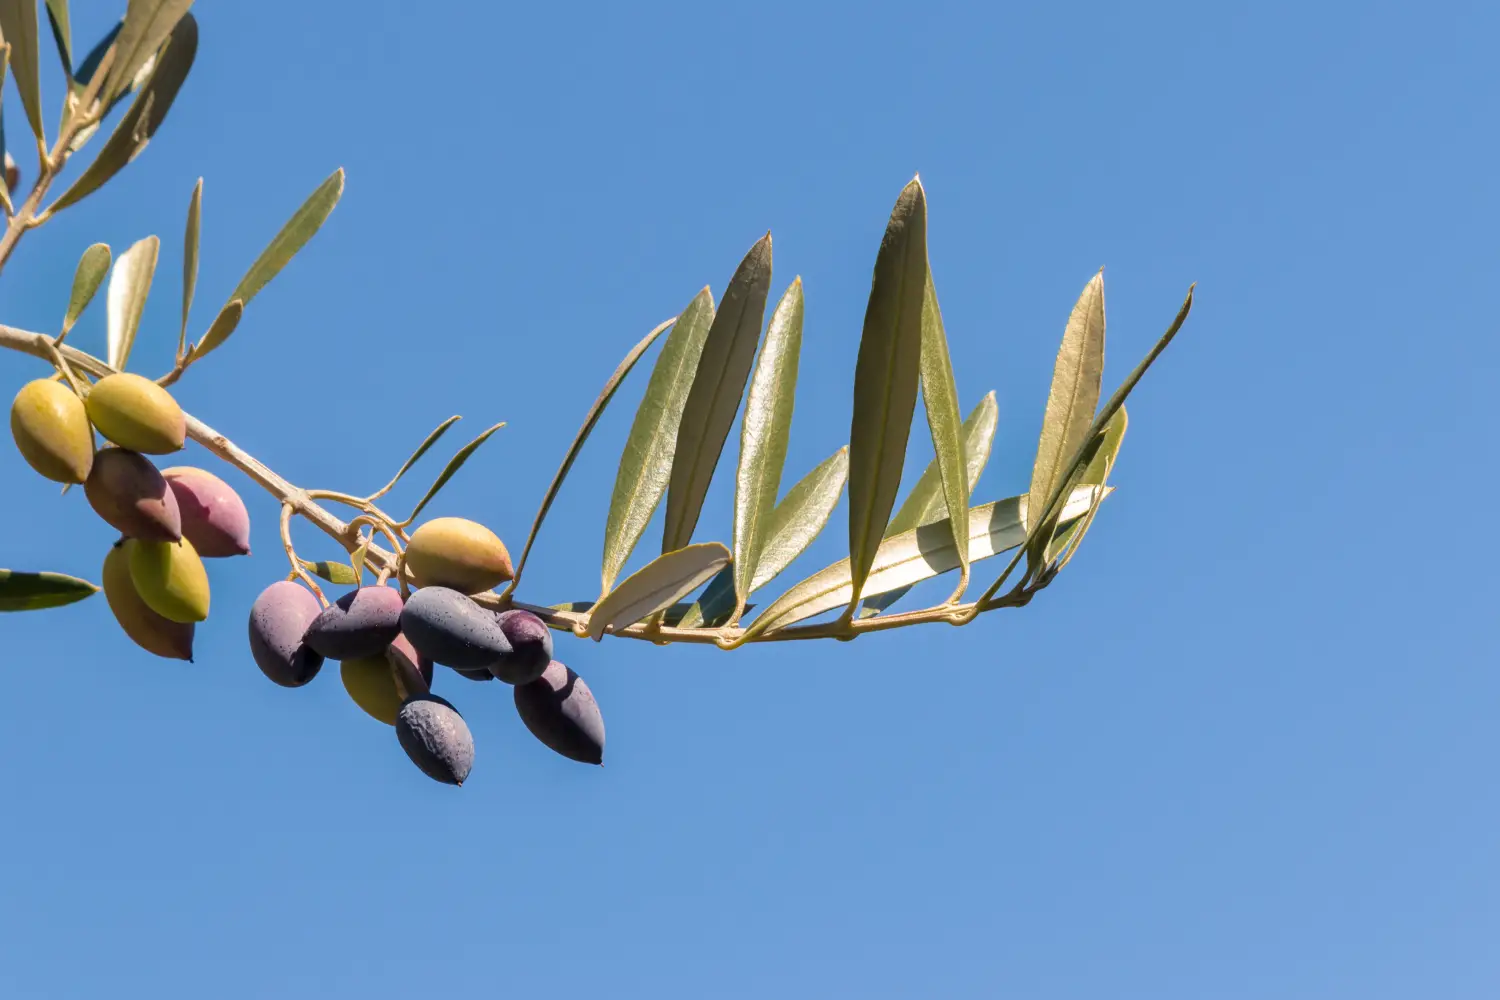 Ferry to Kalamata - Ripe Kalamata olives on olive tree branch against blue sky with copy space.